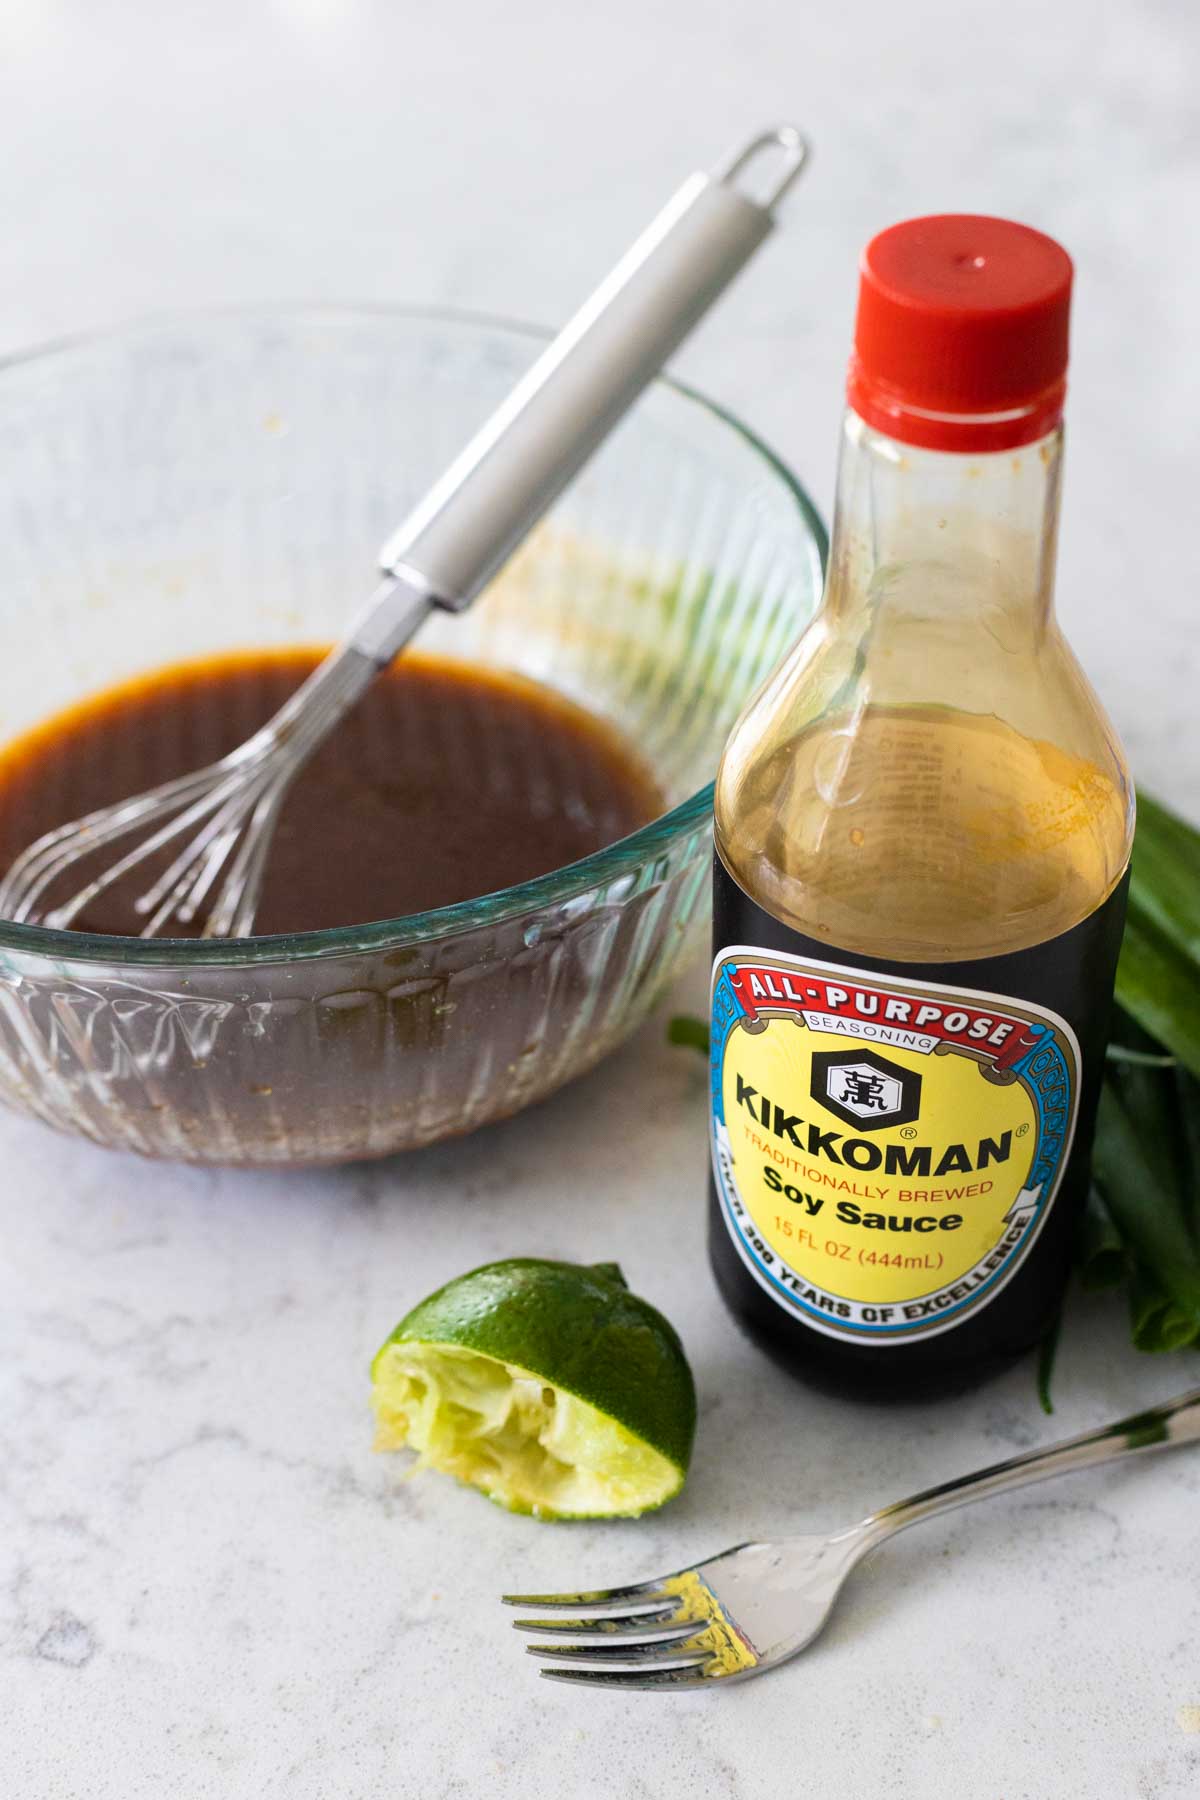 The mixing bowl has a whisk stirring the marinade. A bottle of soy sauce and half of a fresh lime with a fork sit next to the bowl.